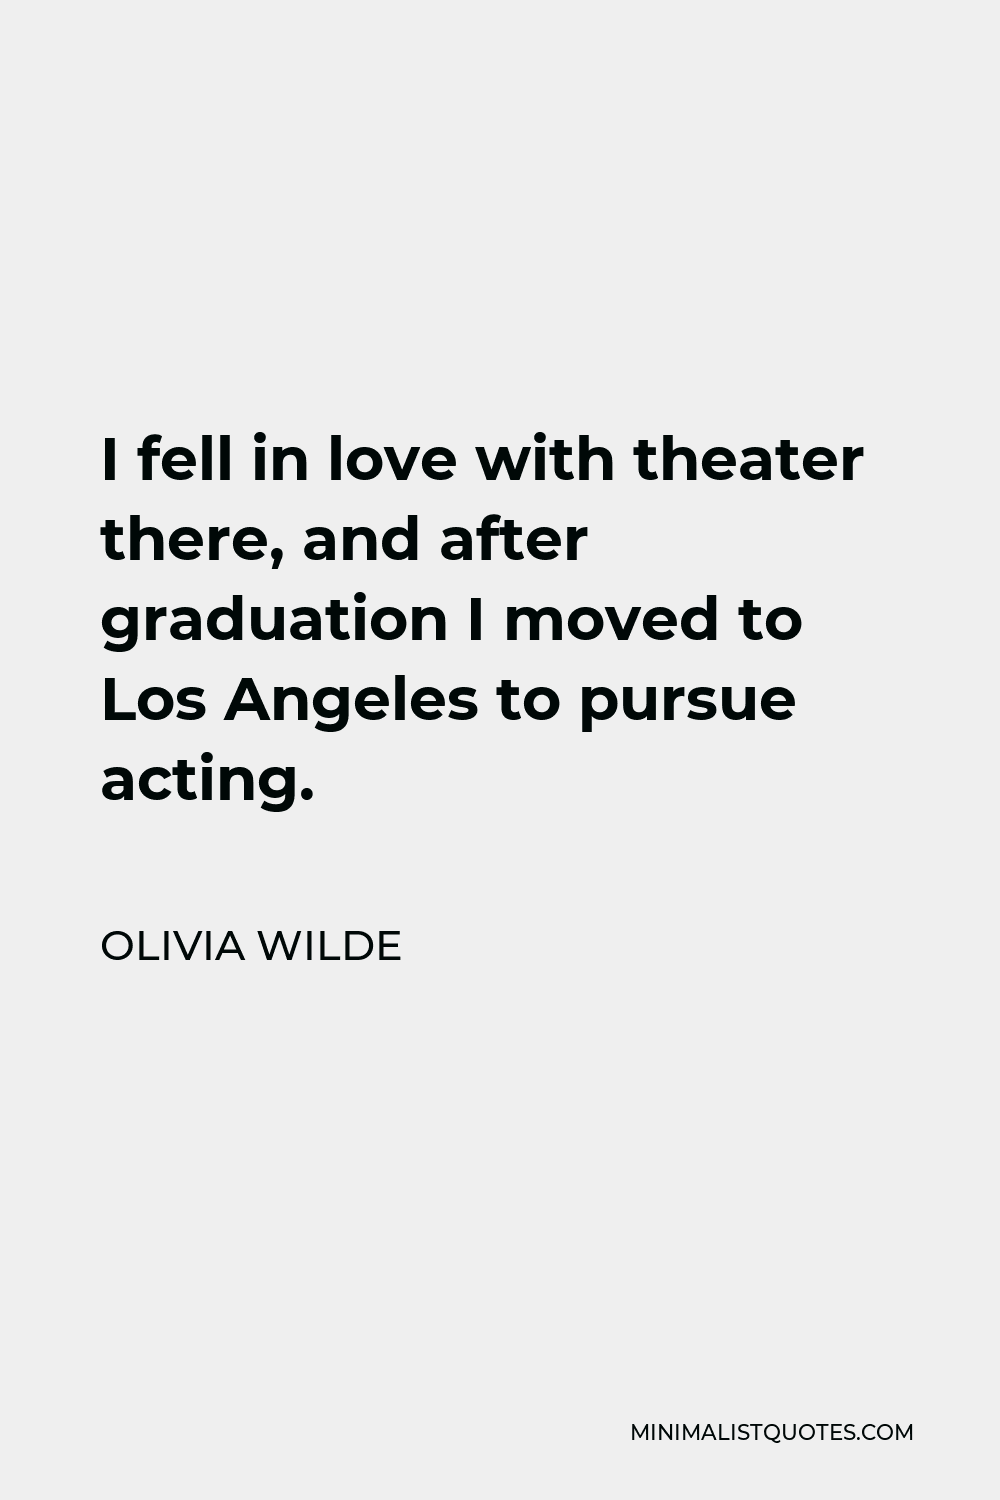 Olivia Wilde Quote - I fell in love with theater there, and after graduation I moved to Los Angeles to pursue acting.